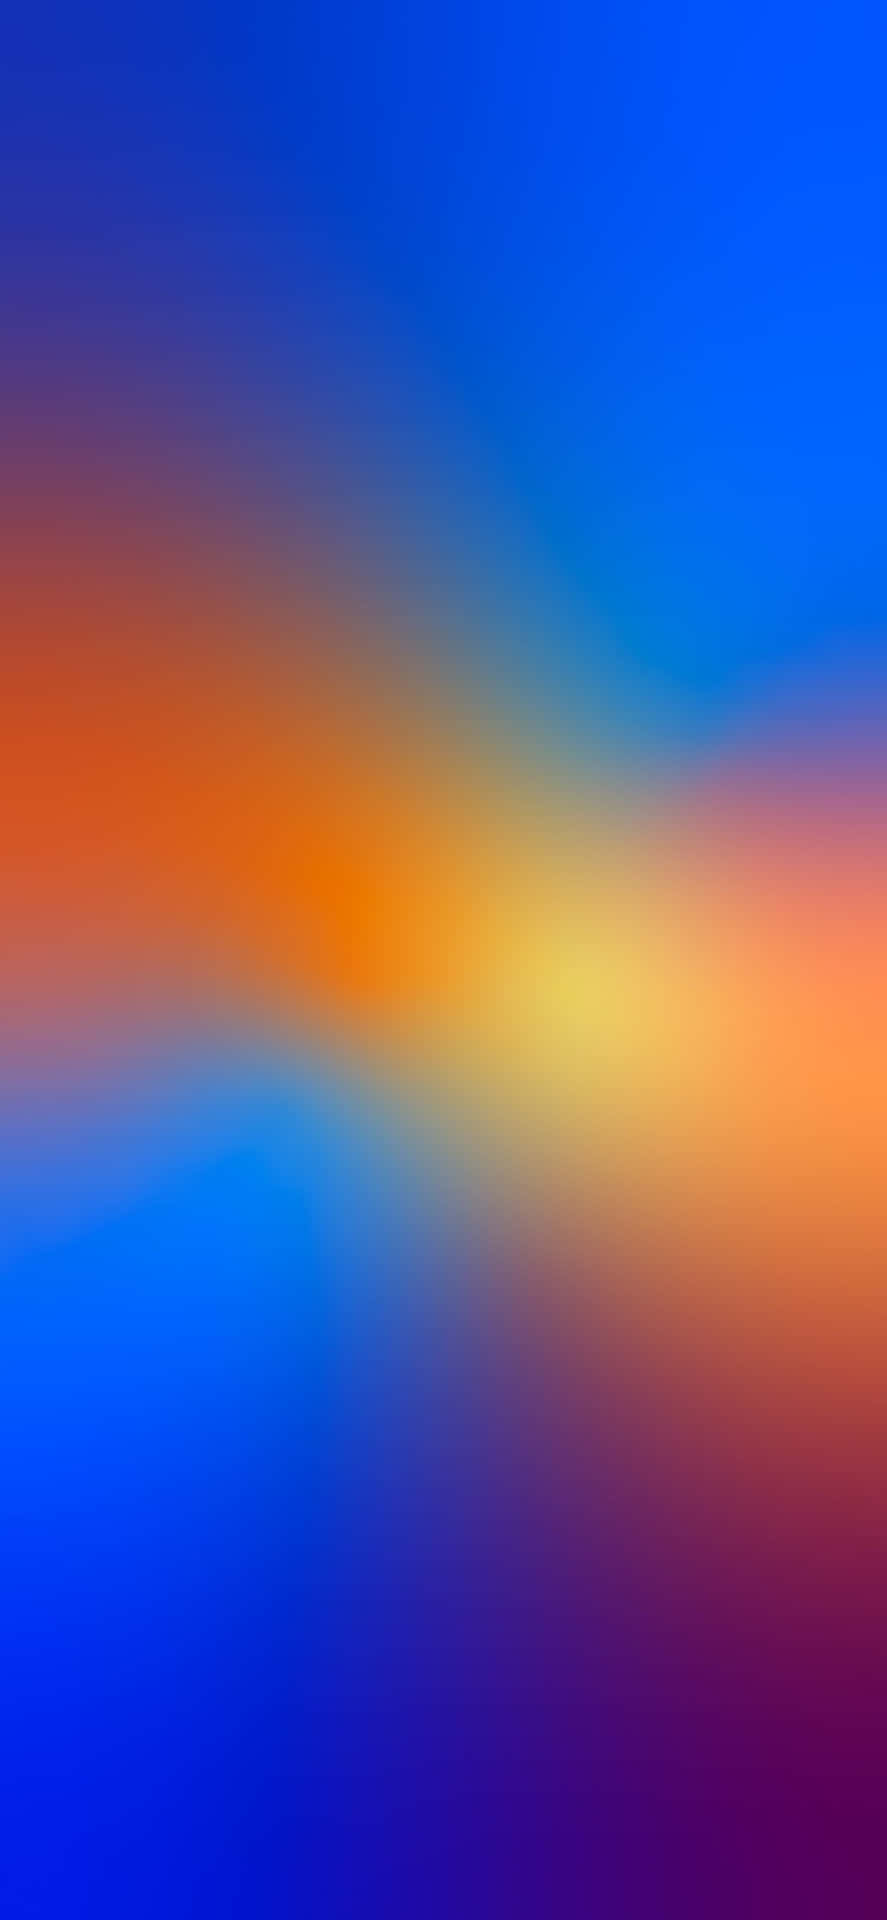 A Mirrored Blue and Orange Background